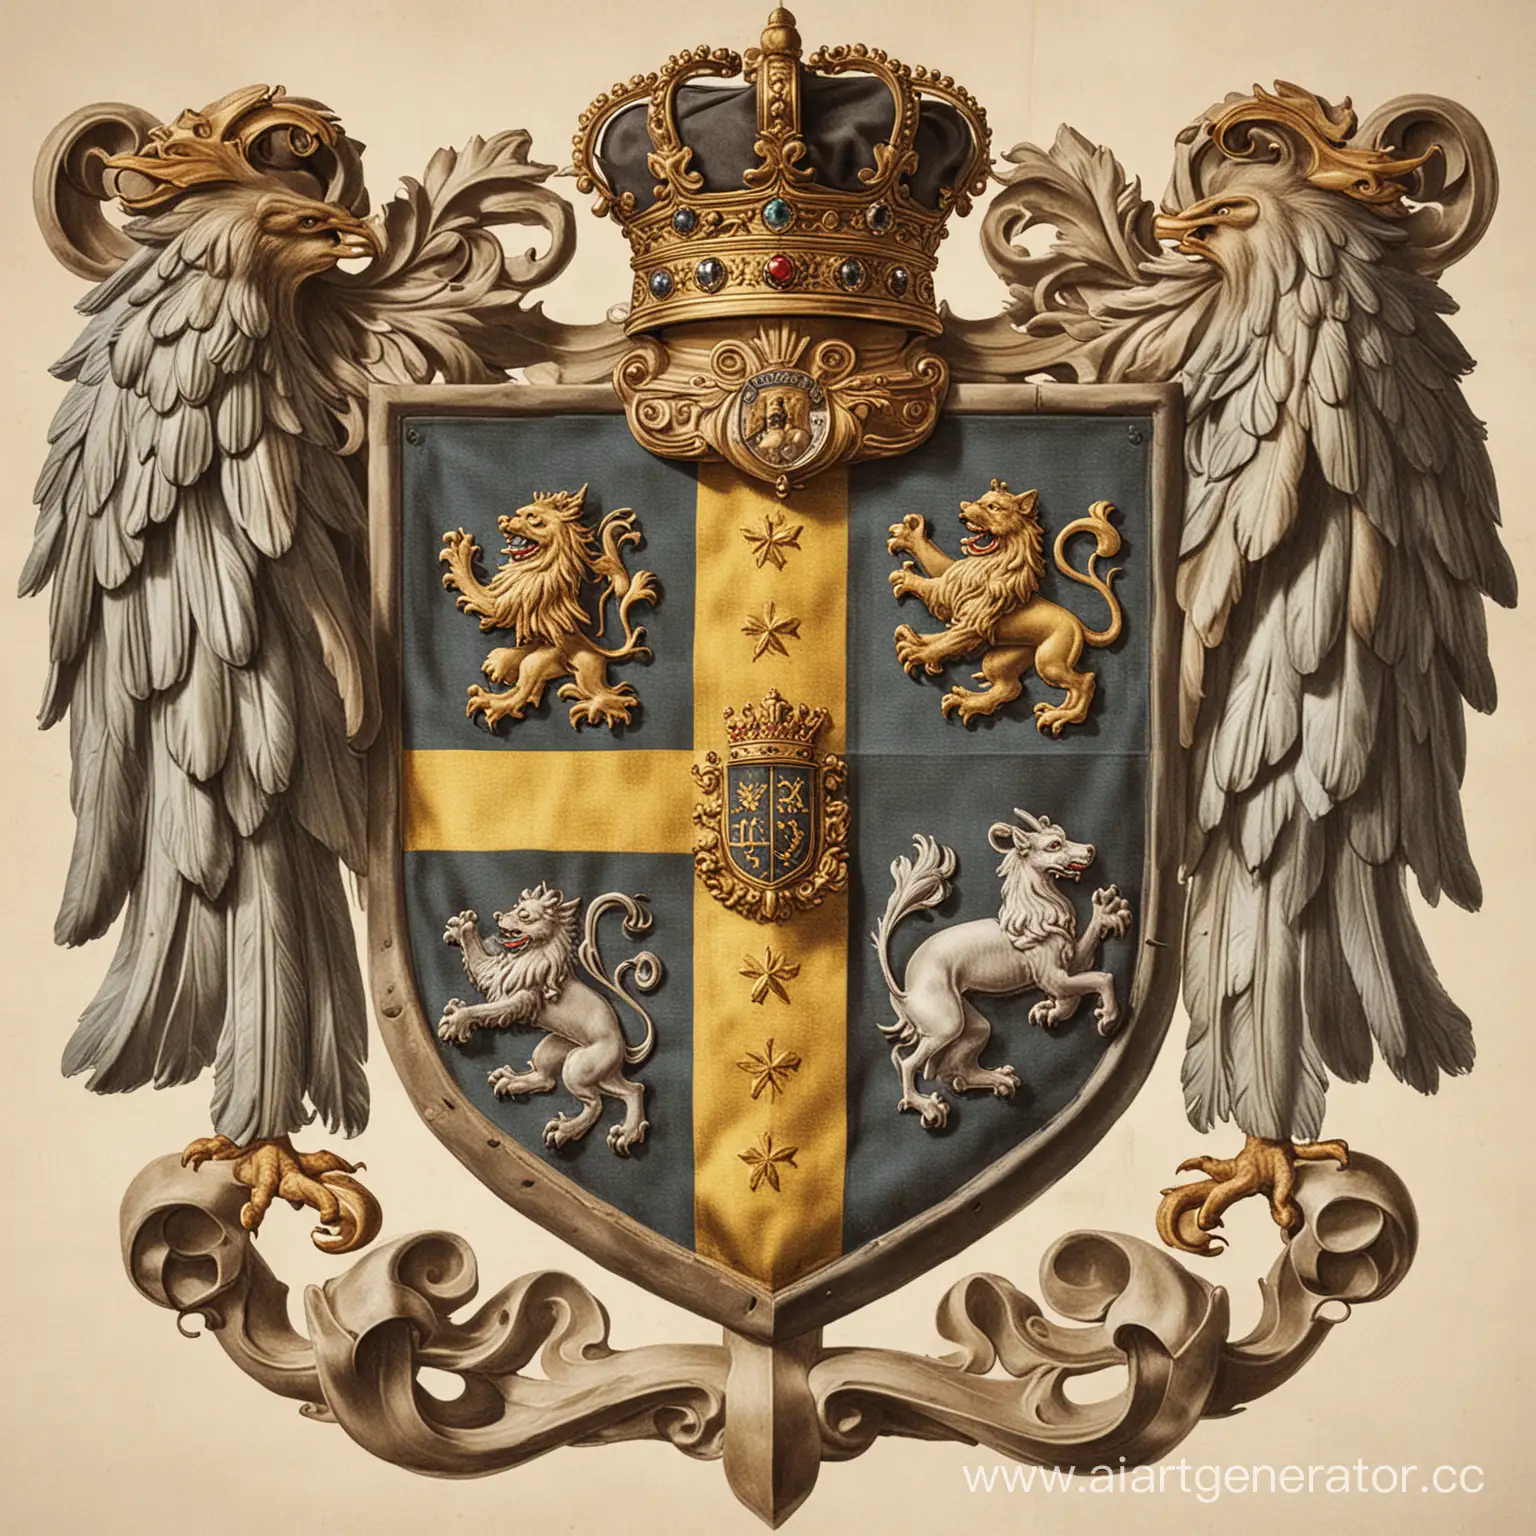 Historic-Trading-Guilds-Coat-of-Arms-with-Gold-Coins-and-Scales